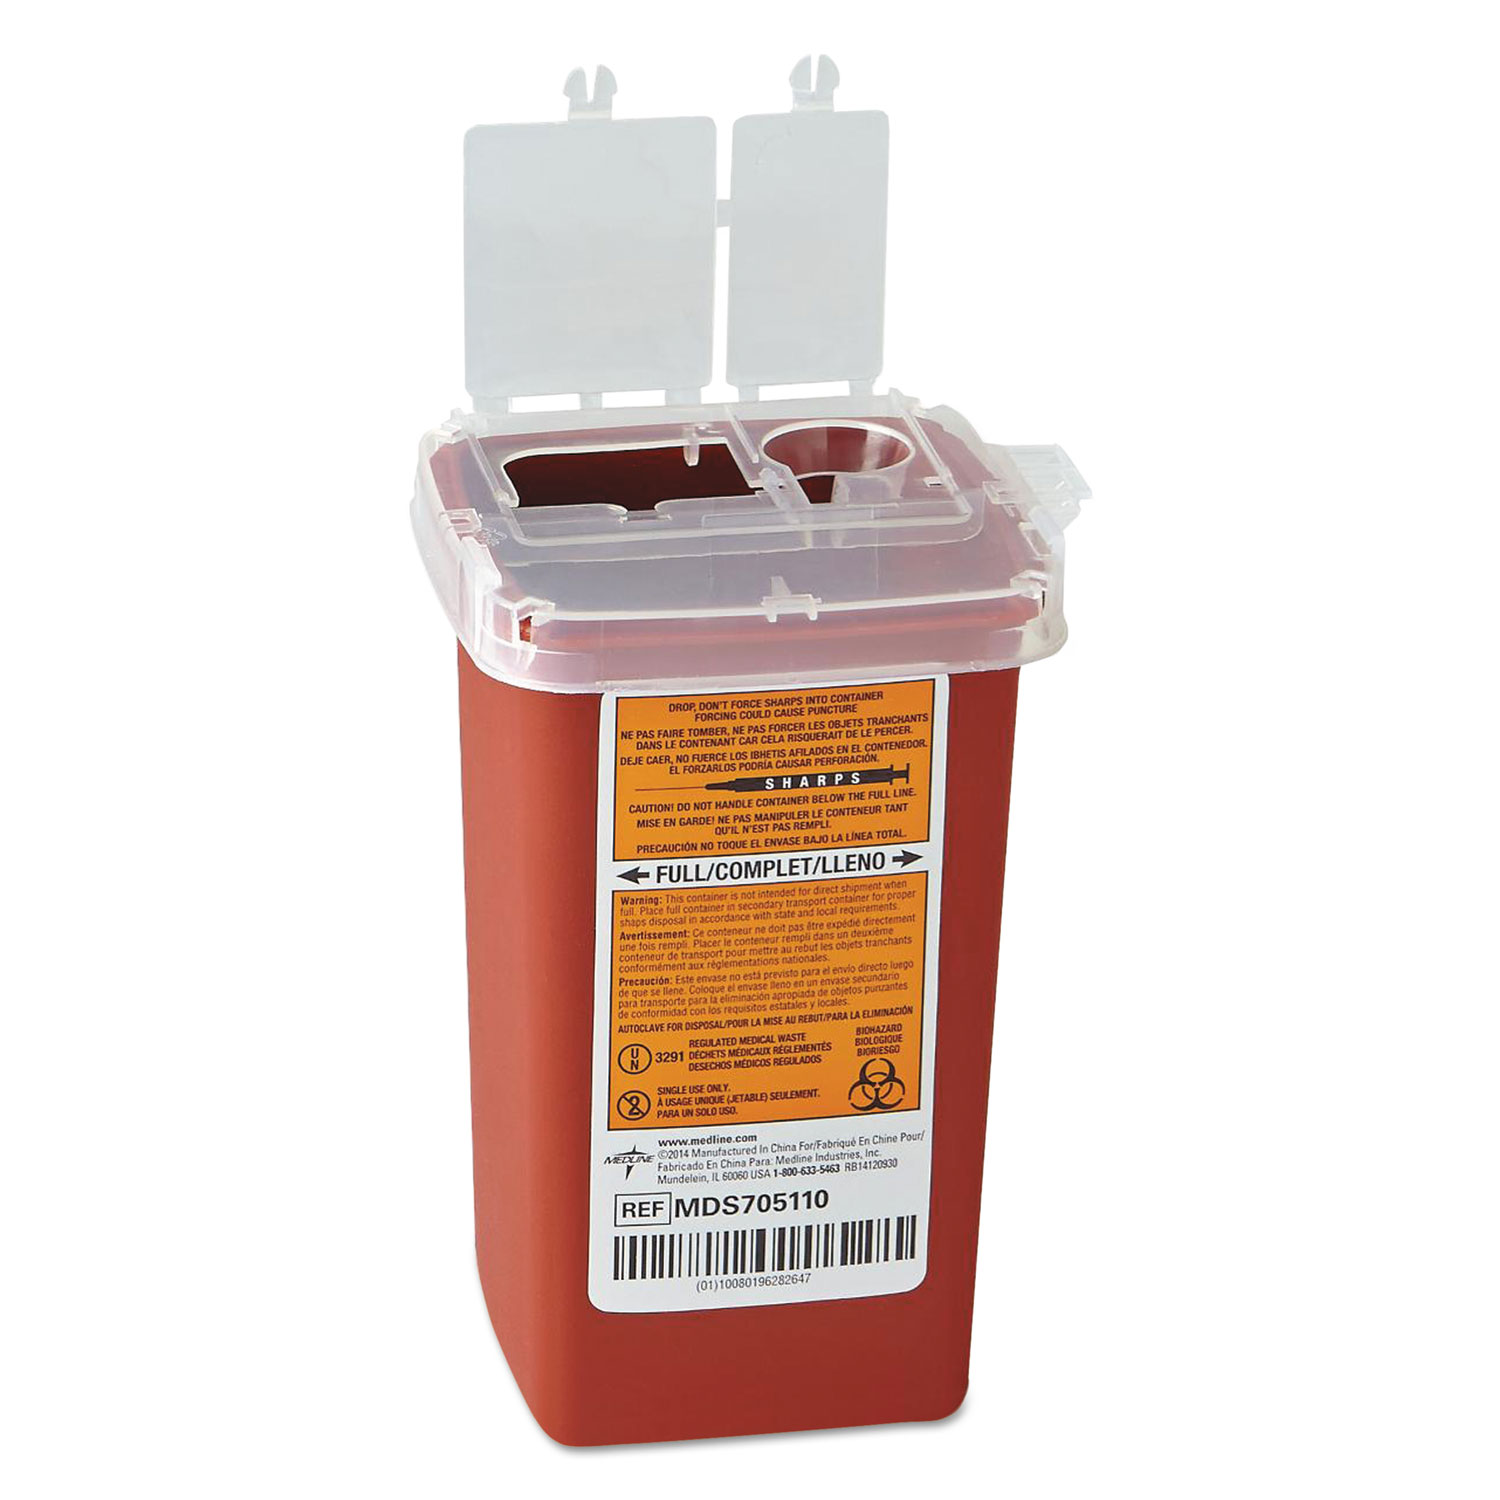 Sharps Container, Freestanding/Wall Mountable, 1qt, 4 1/4 x 4 x 6, Red